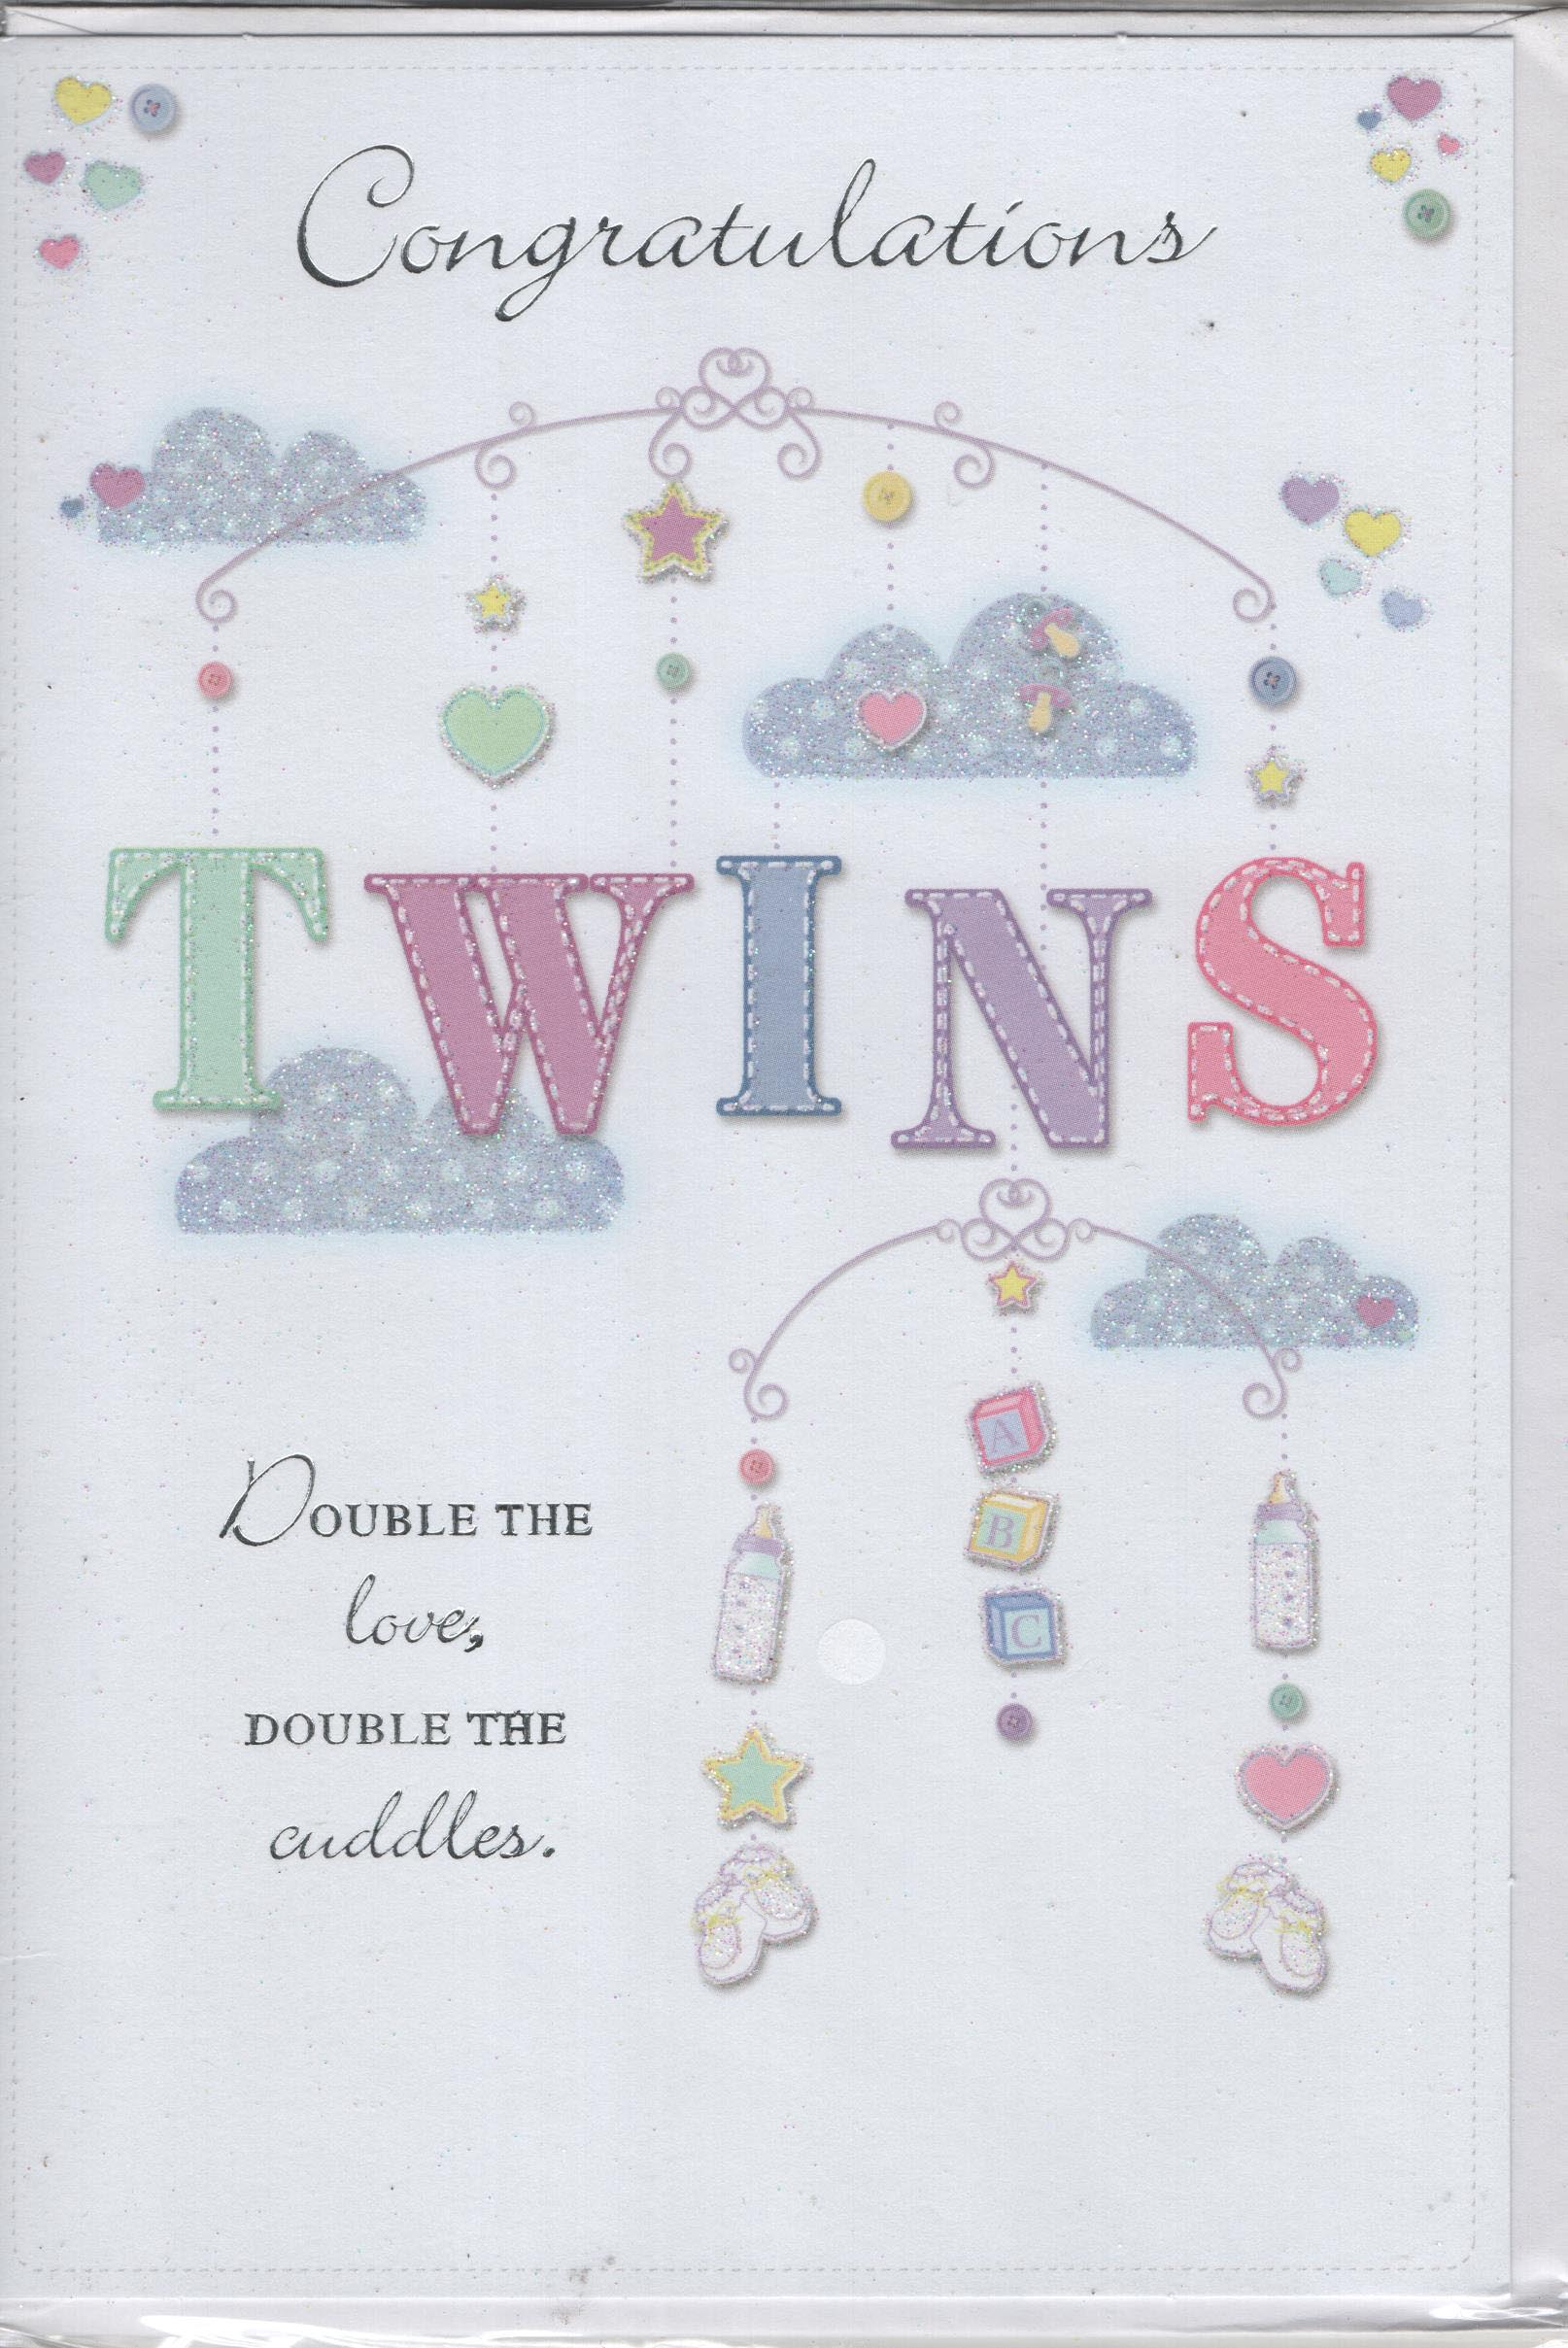 Simon Elvin Greeting Card : Congratulations Twins Double The Love, Double The Cuddles